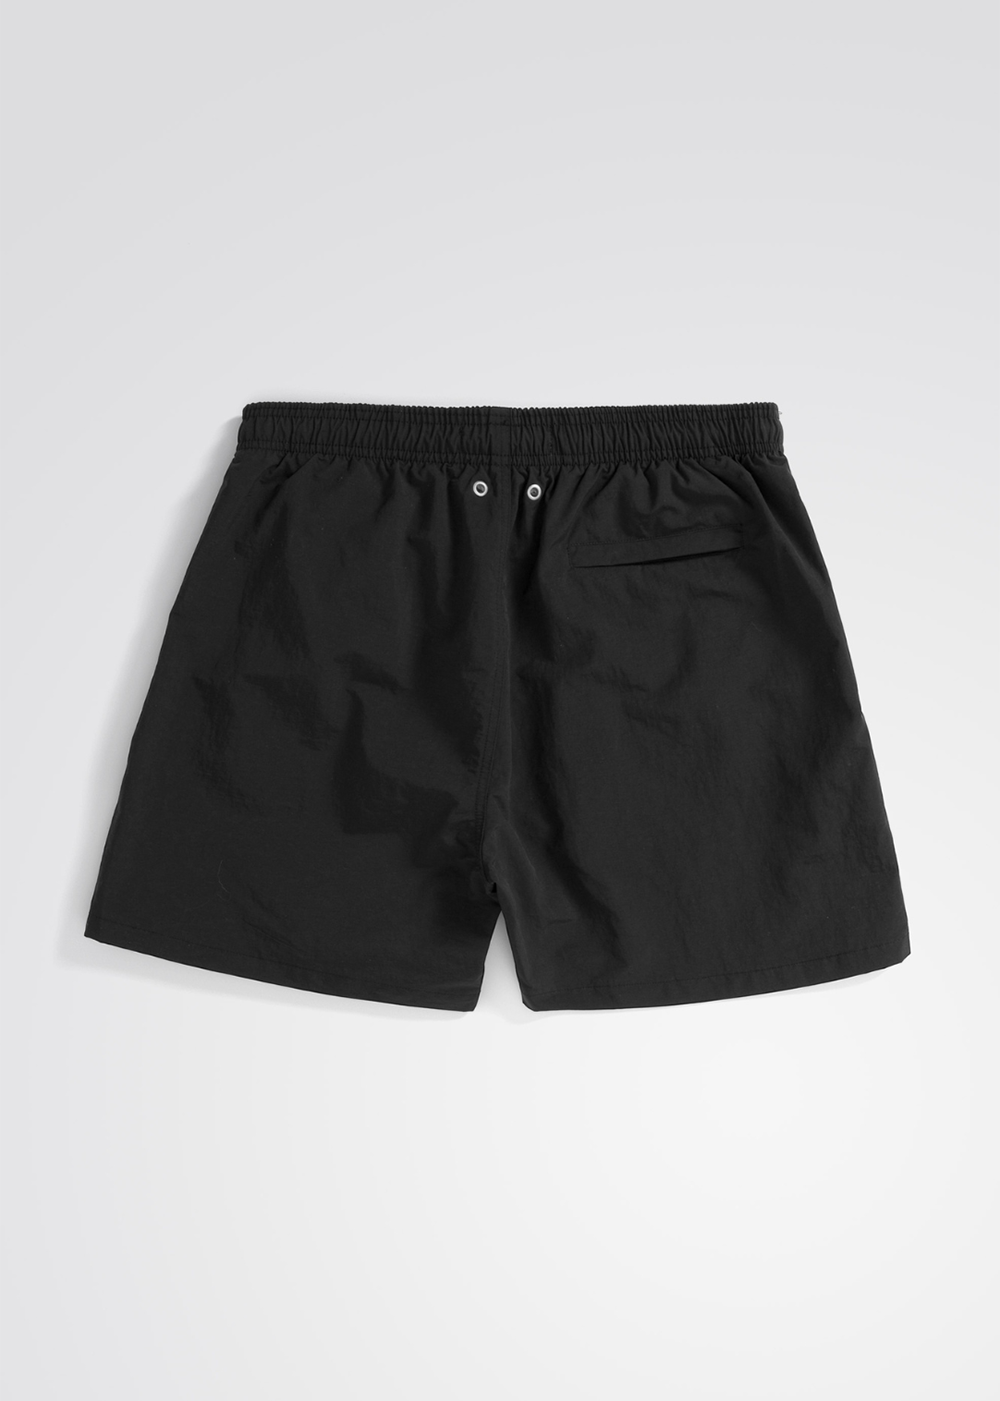 Hauge Recycled Nylon Swimmers - Black - Norse Projects - Danali - N35-0606